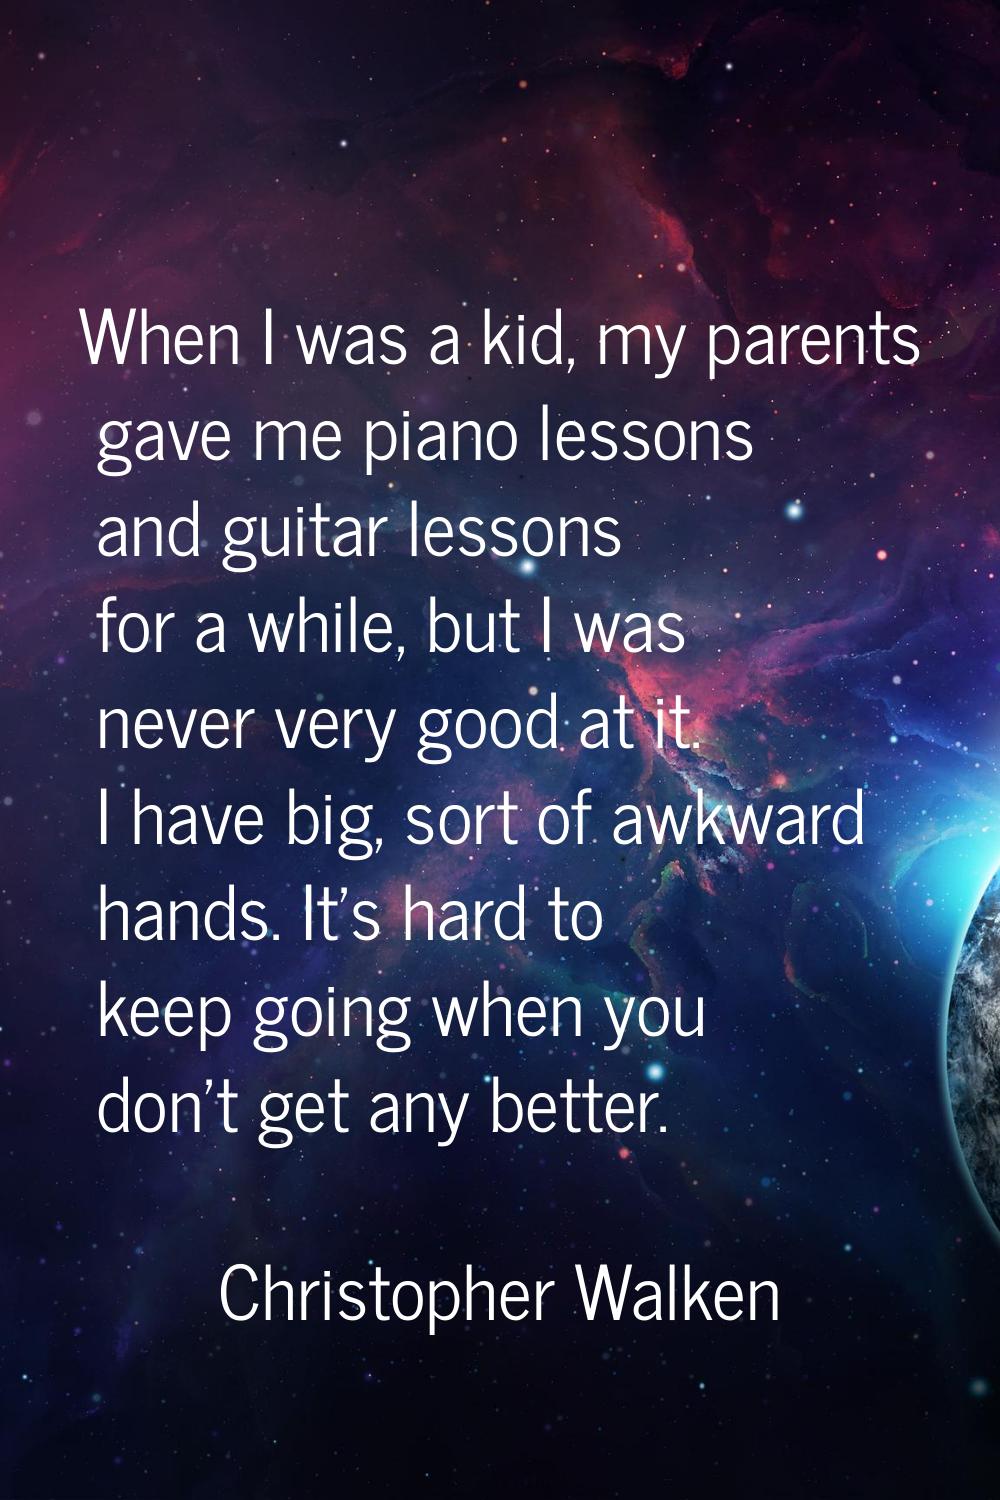 When I was a kid, my parents gave me piano lessons and guitar lessons for a while, but I was never 